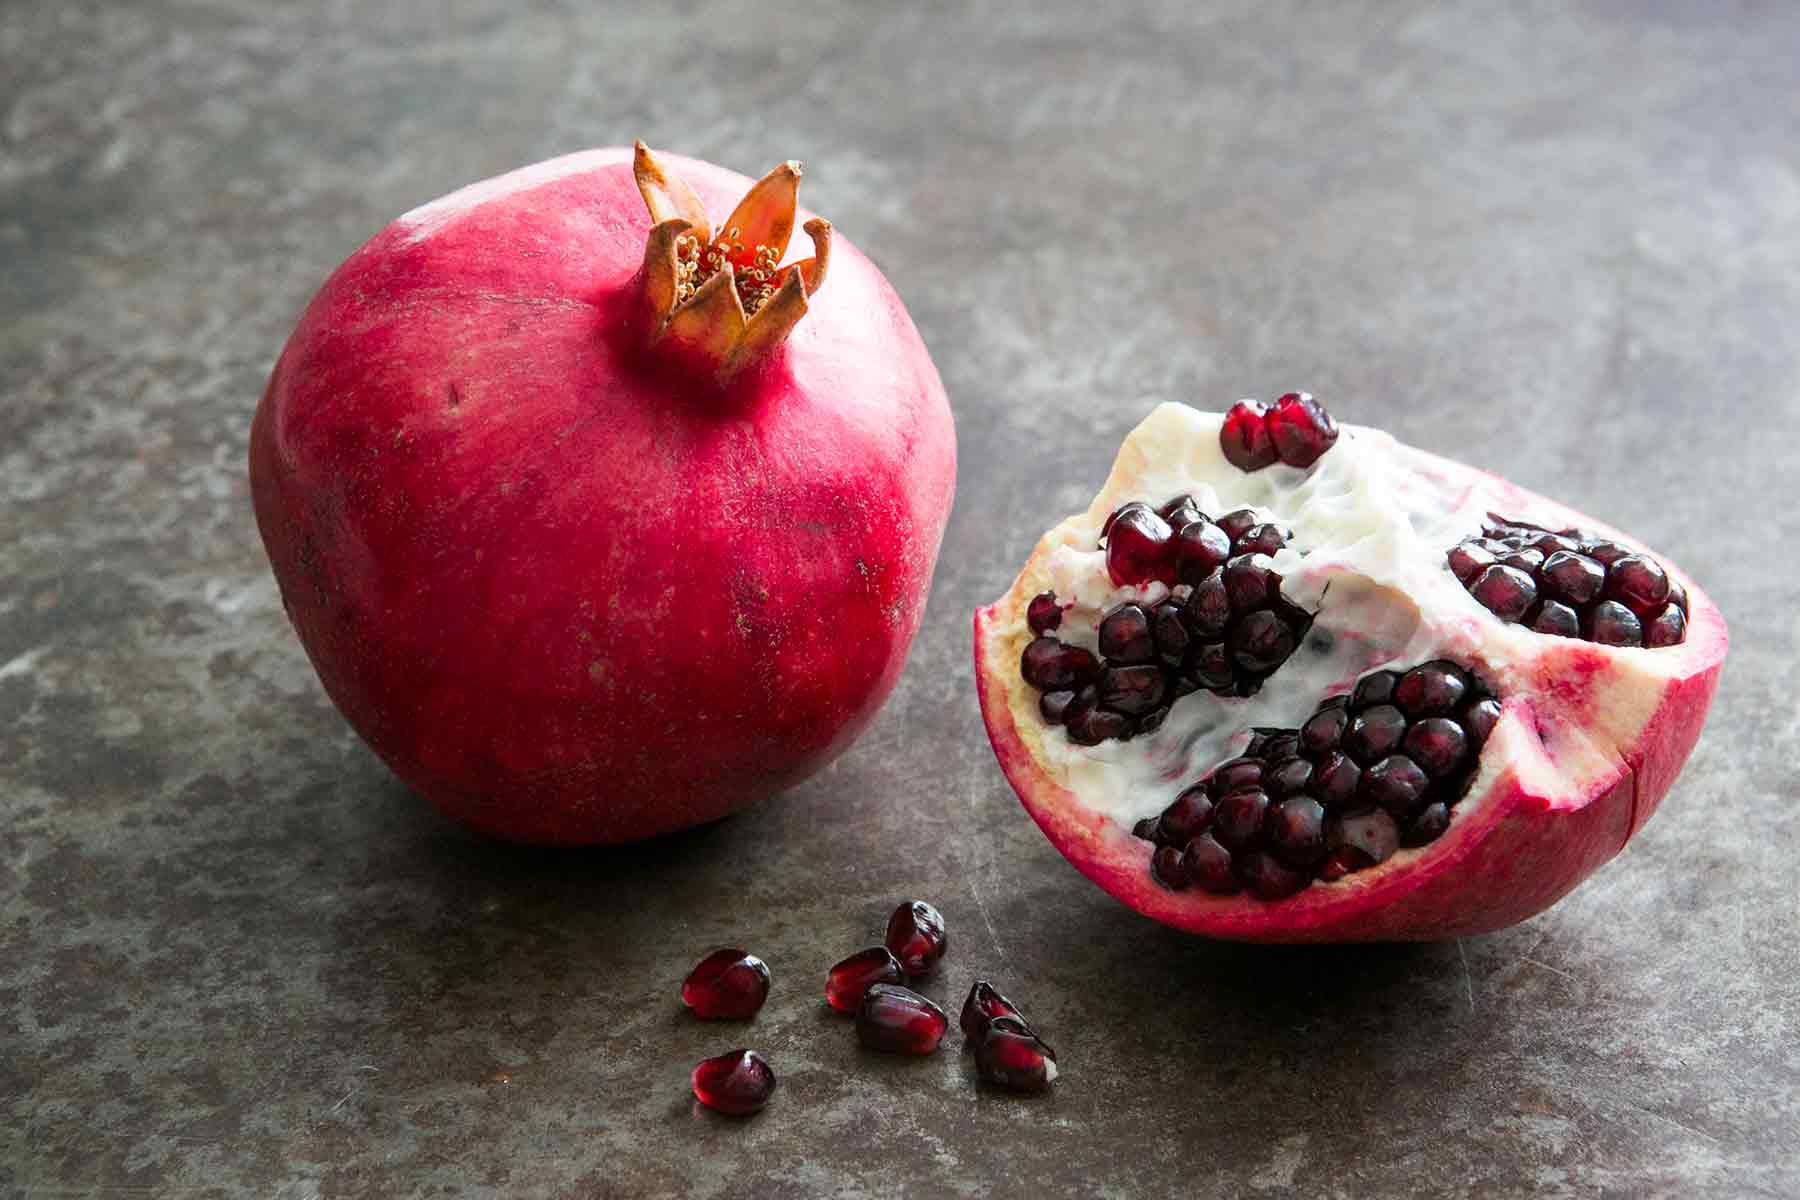 How To Store Pomegranate Once Cut